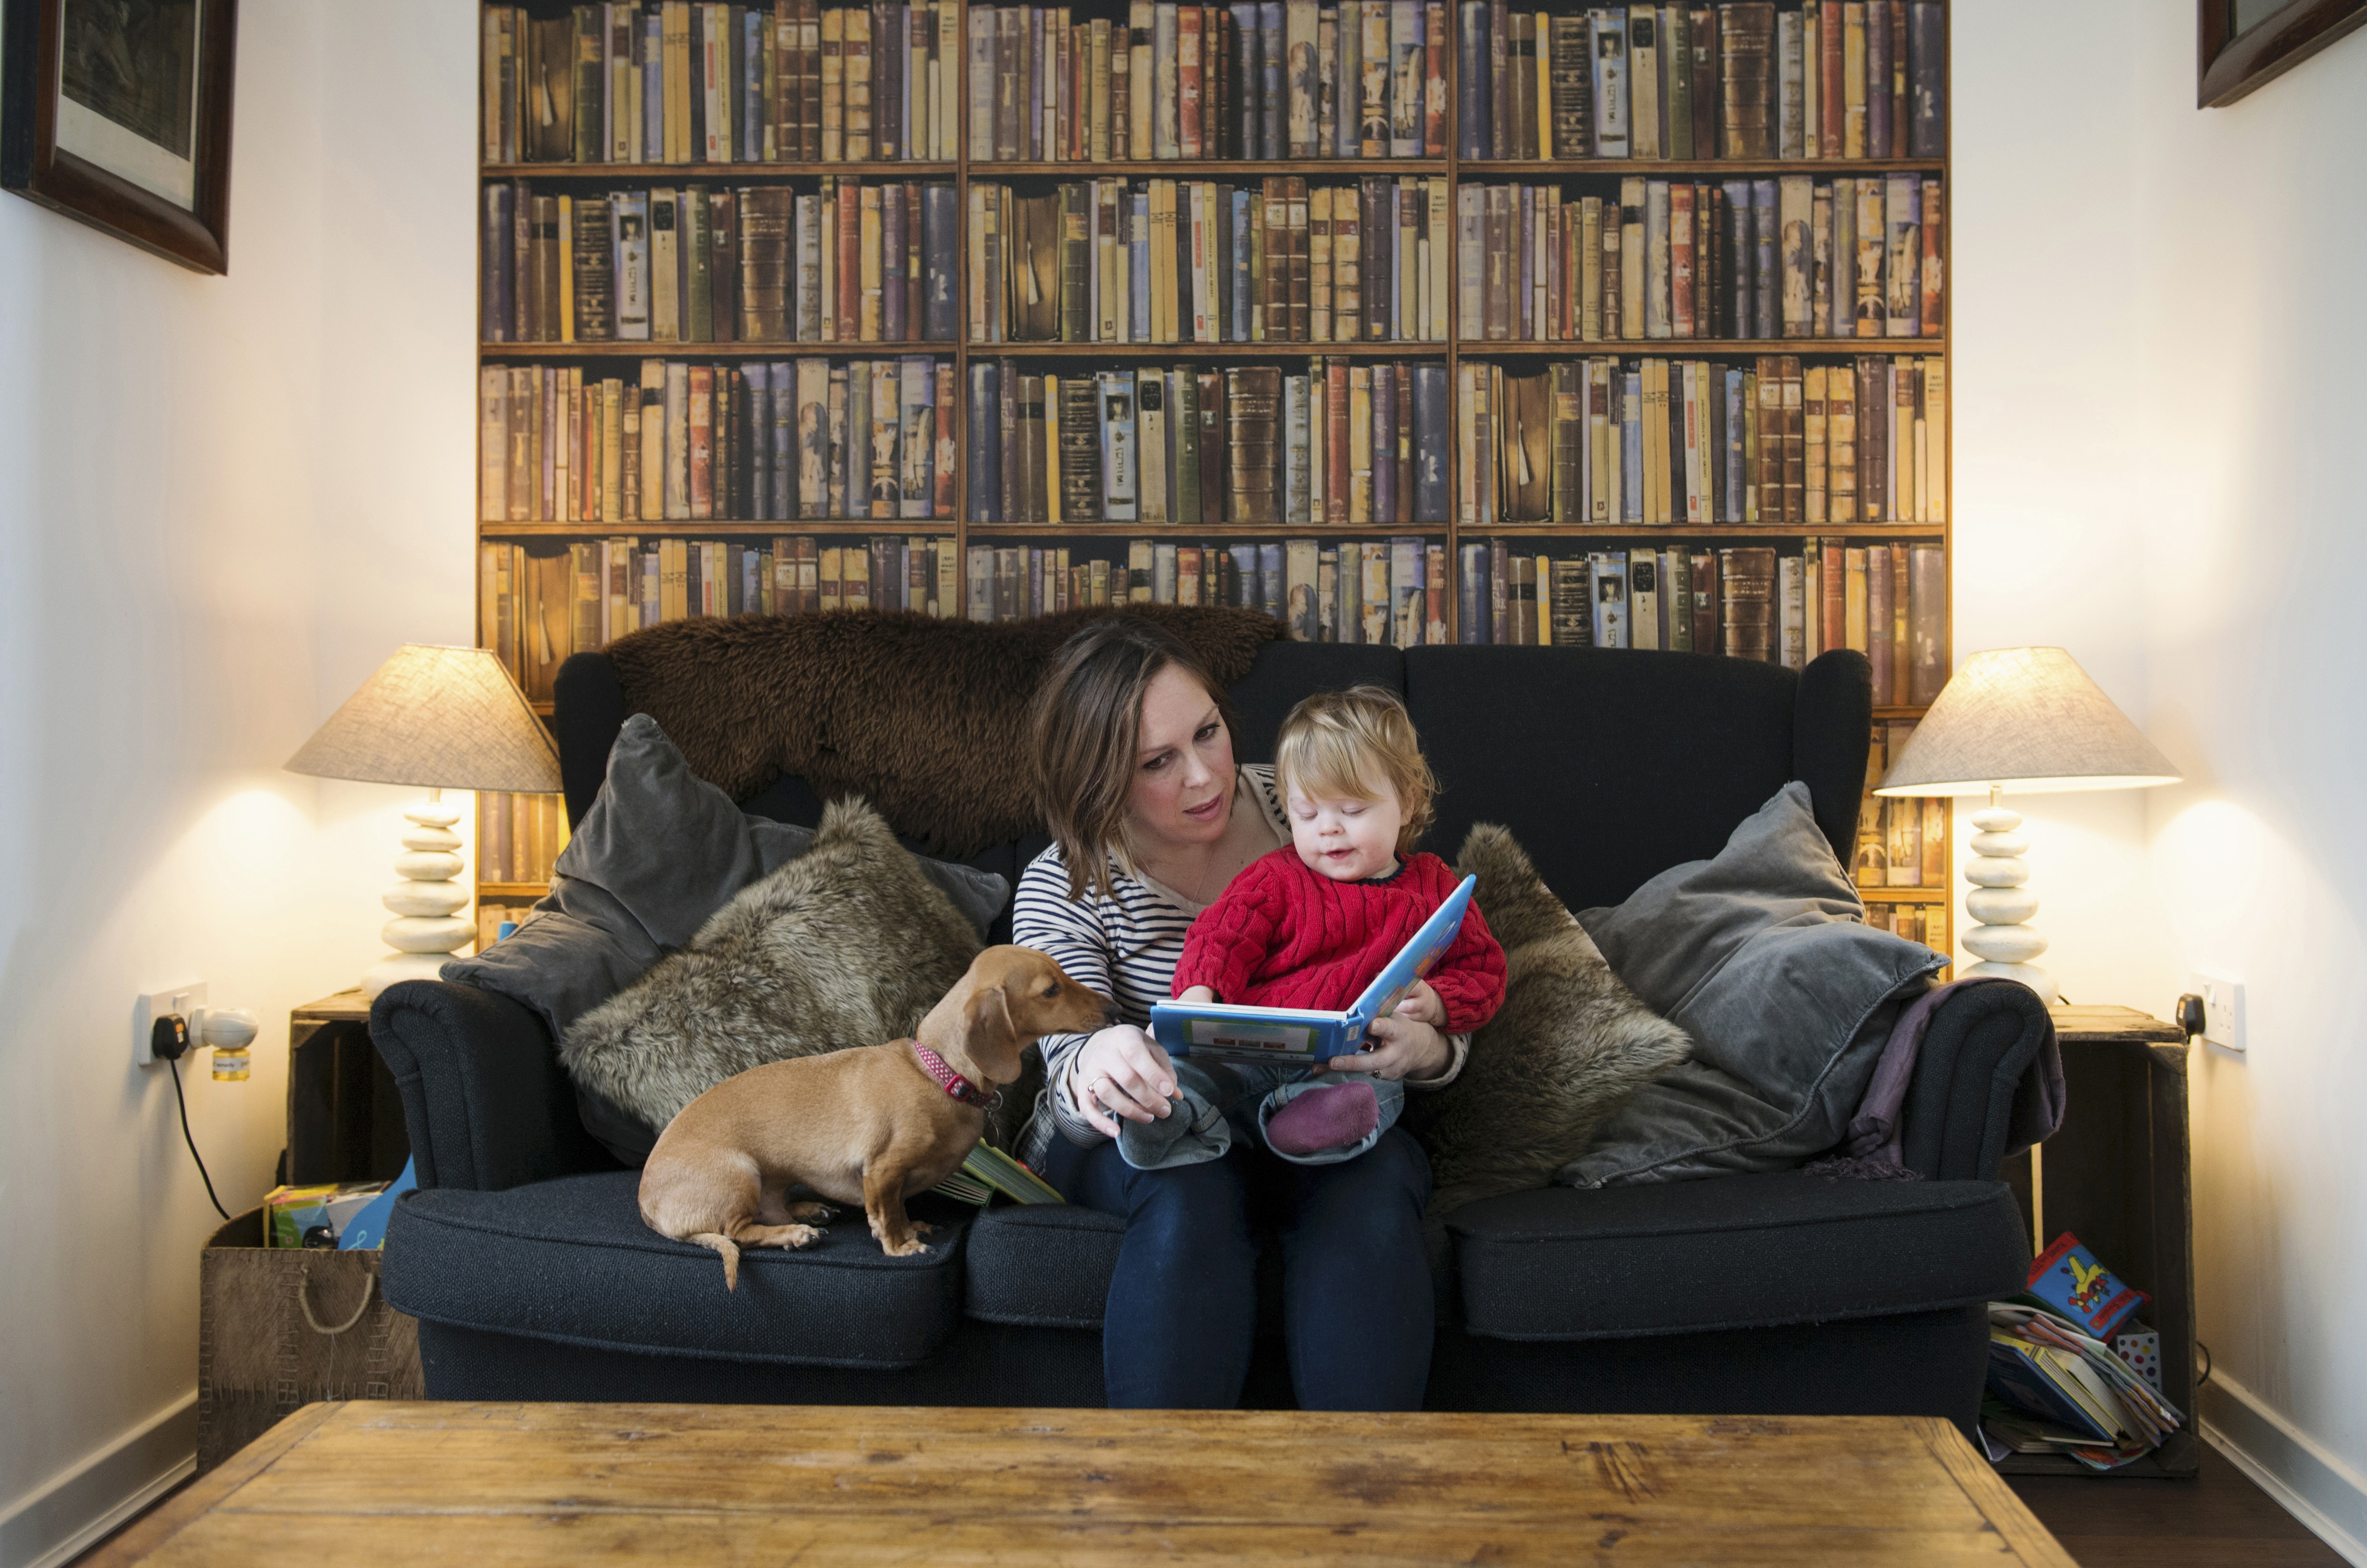 12 Feb 2015 --- Mother reading book to son on sofa --- Image by © Corbis [26JANUARY2016 FEATURES FAMILY]